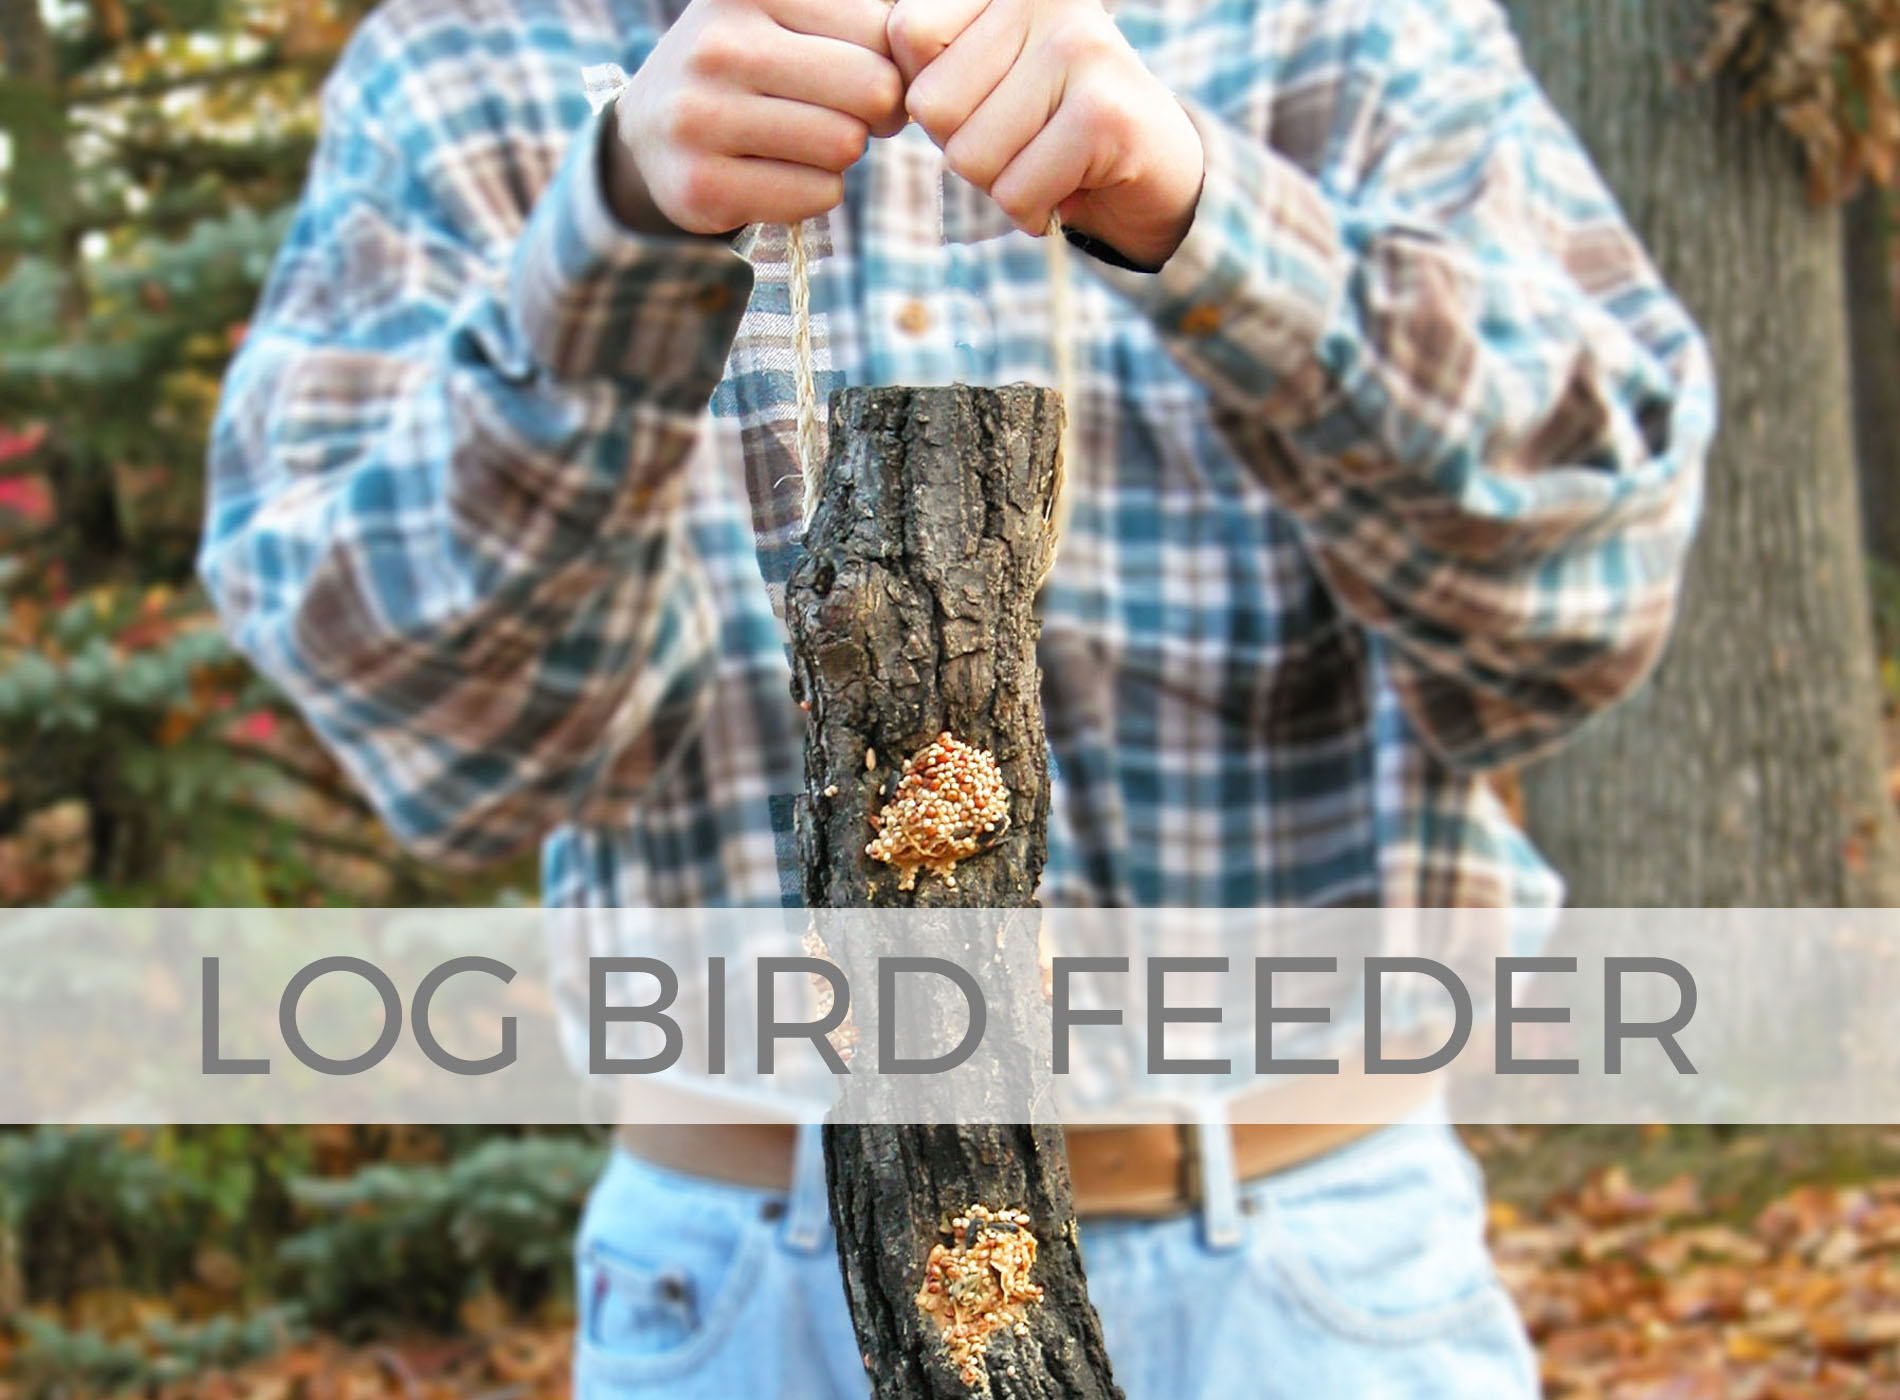 Take care of our feathered friends with this DIY Log Bird Feeder by Larissa of Prodigal Pieces | prodigalpieces.com #prodigalpieces